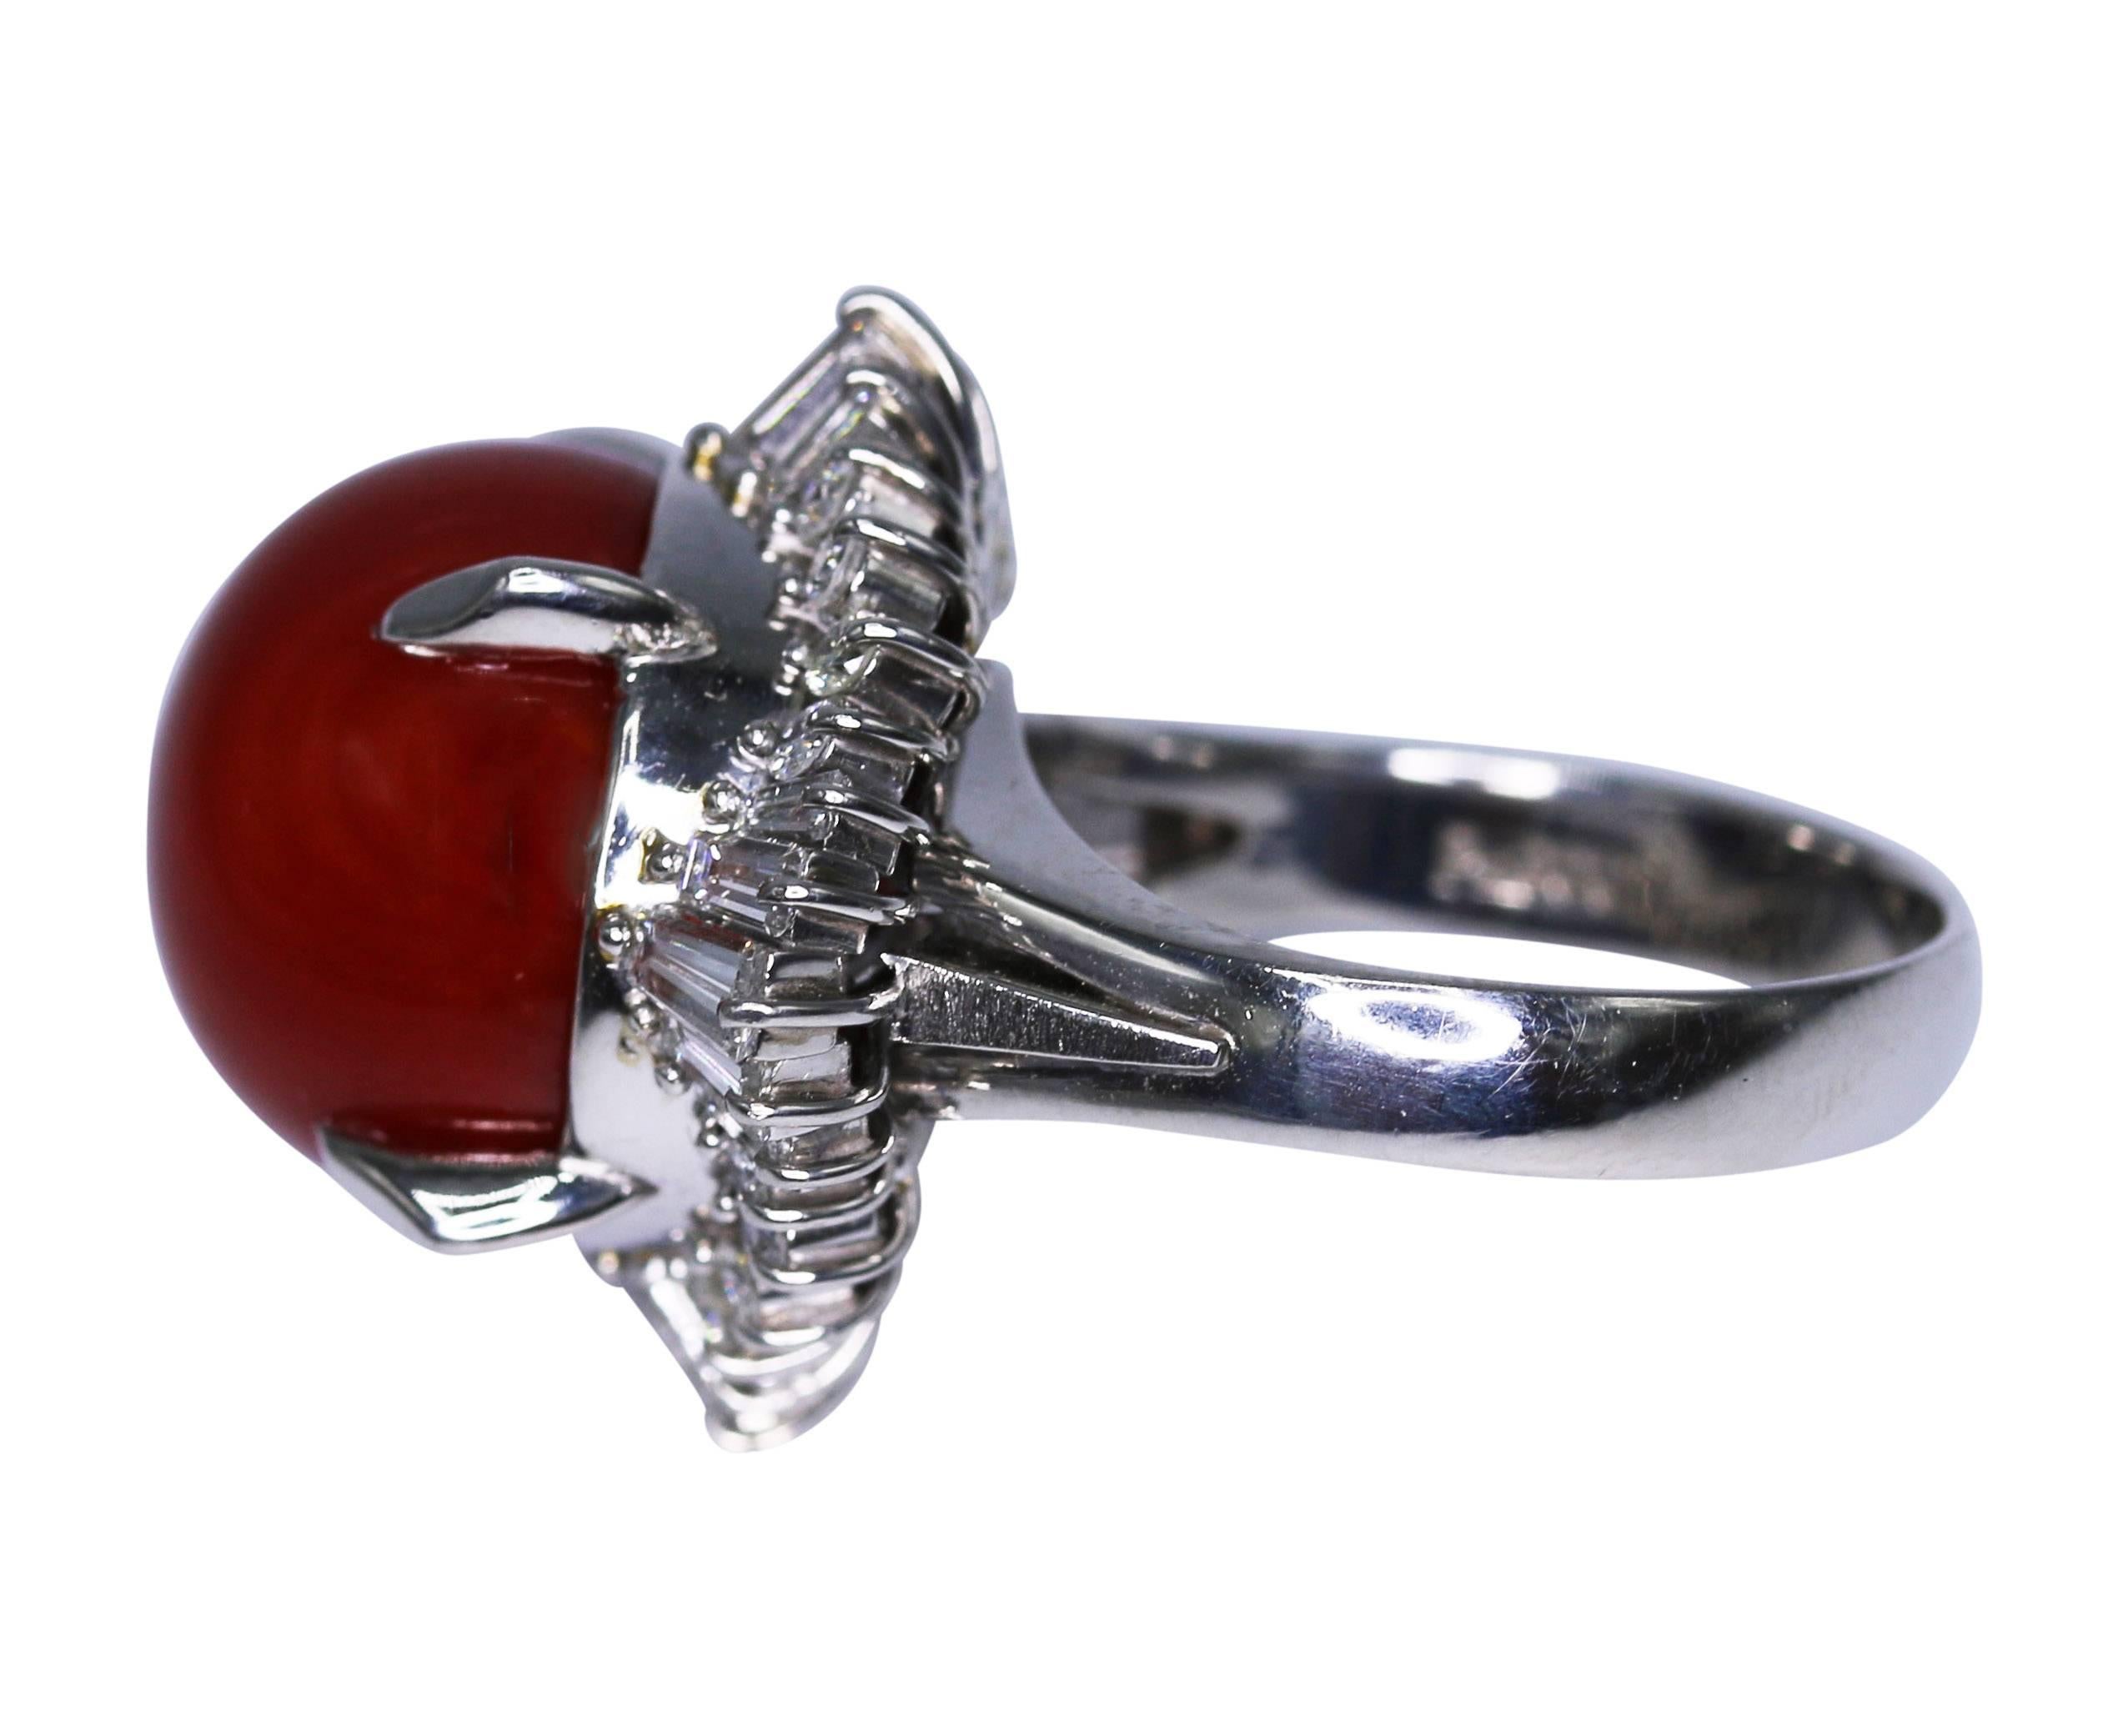 Platinum, Japanese Aka coral and diamond ring, set in the center with a round deep red cabochon coral, framed by diamonds weighing approximately 1.15 carats, gross weight 14.9 grams, size 5, measuring 1 1/4 by 7/8 by 7/8 inches. The coral is of a